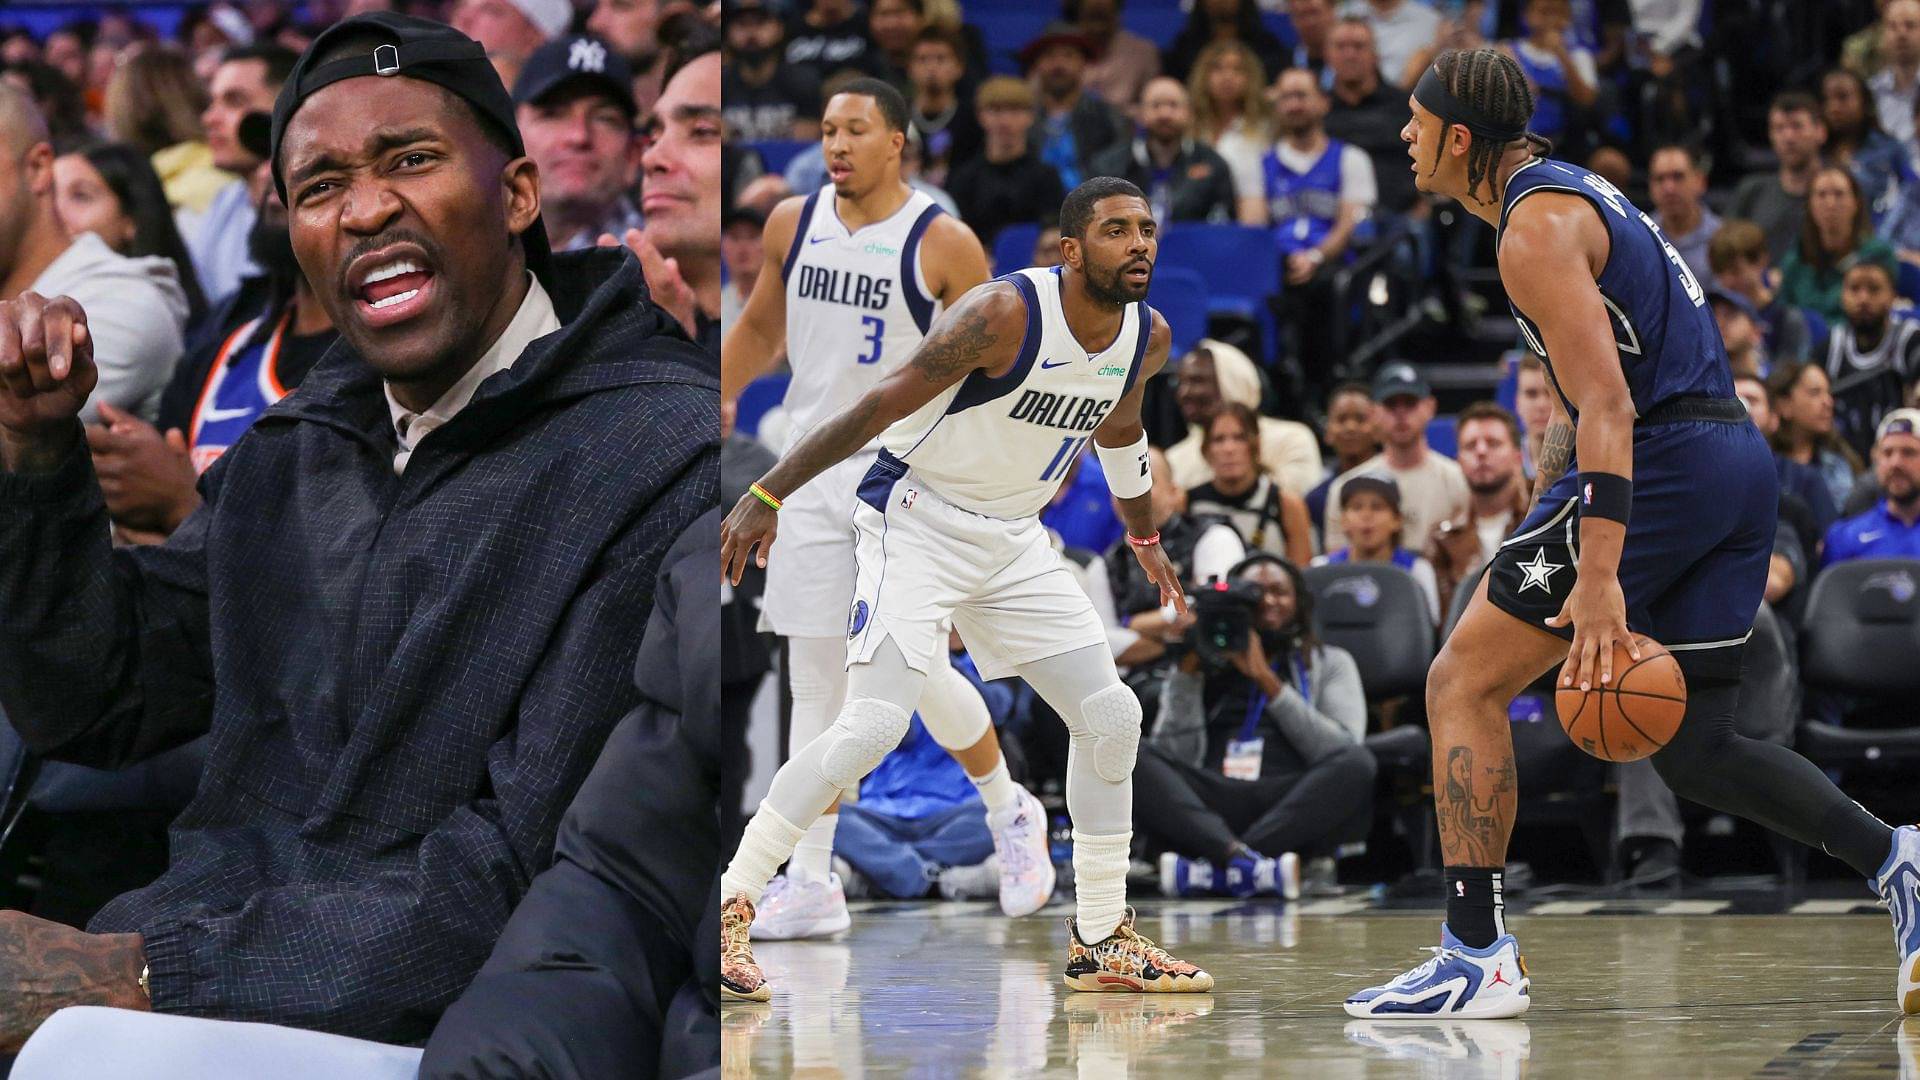 “In High School Dawg, He’s 15”: Kyrie Irving Was Taken Aback By Jamal Crawford Revealing Paolo Banchero’s Age Many Years Ago